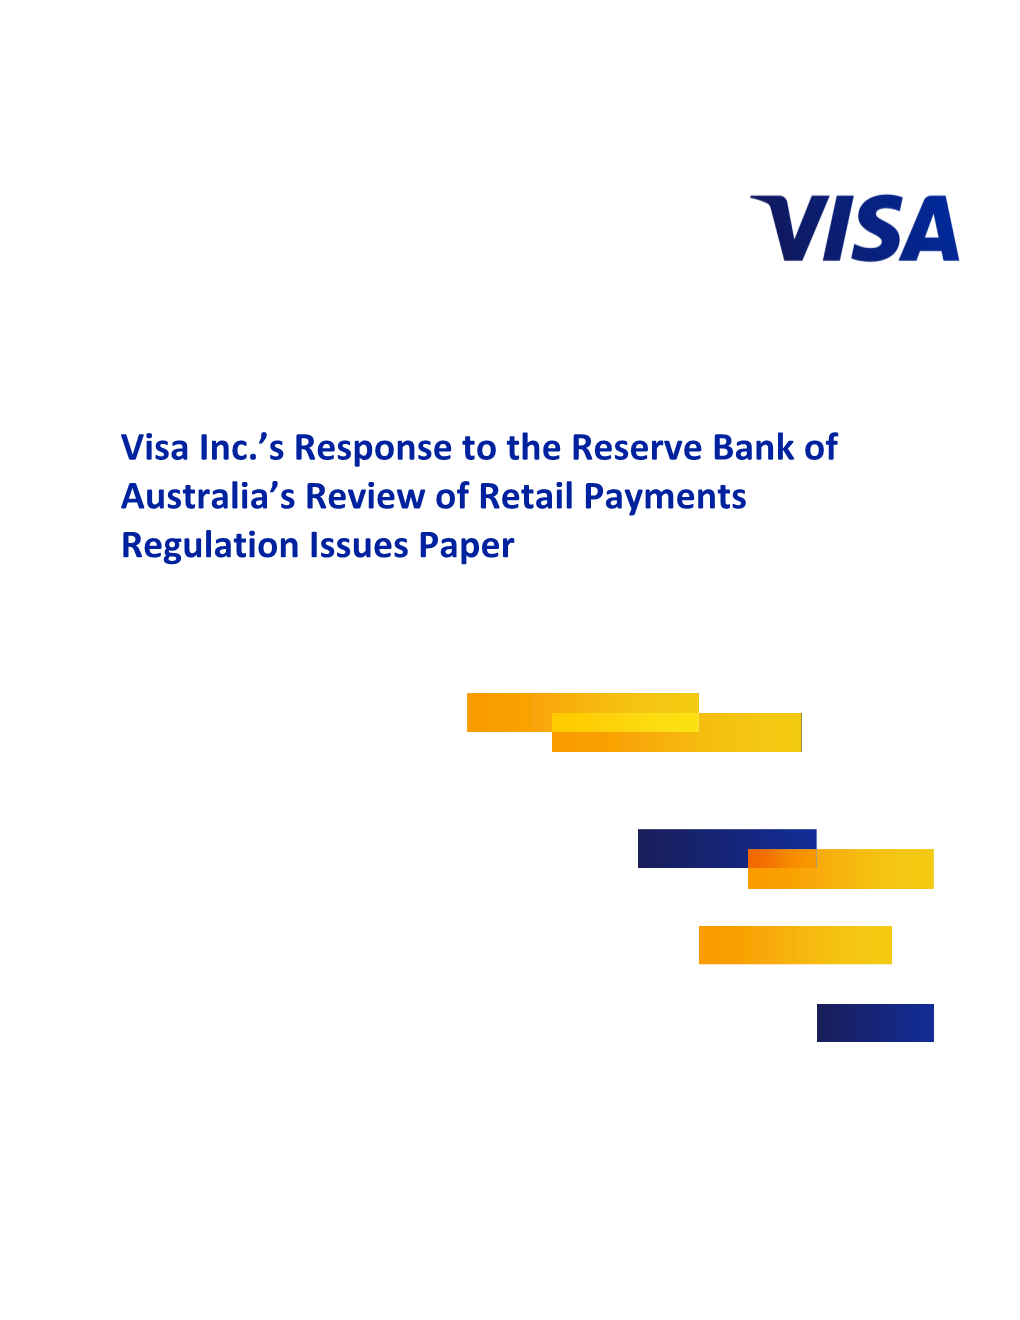 Visa Inc.'S Response to the Reserve Bank of Australia's Review of Retail